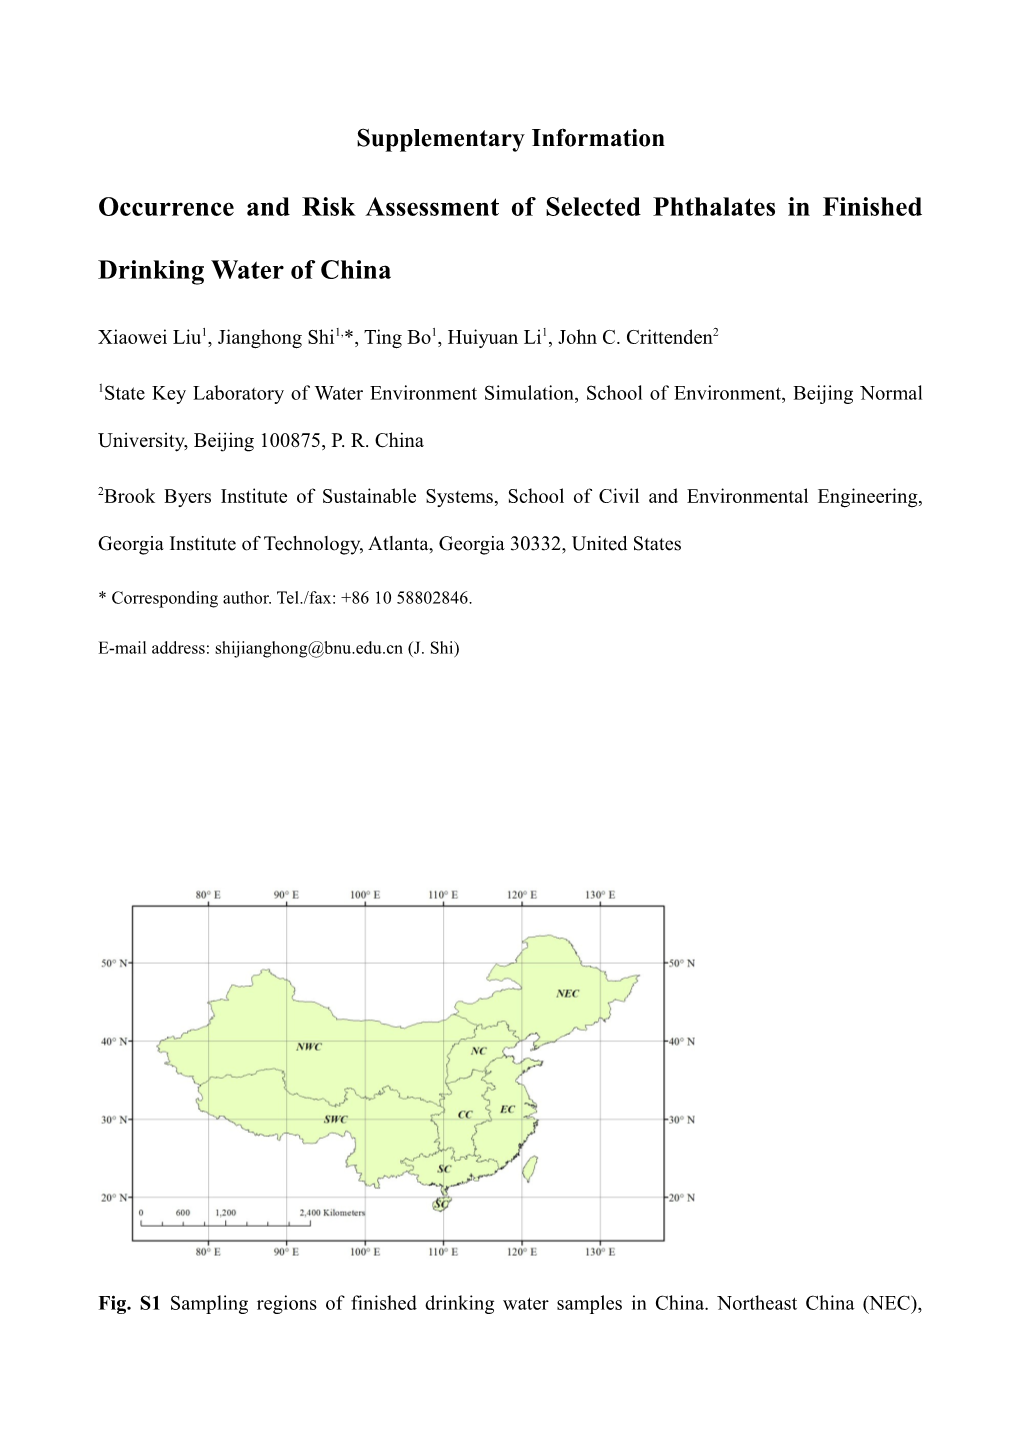 Occurrence and Risk Assessment of Selected Phthalates in Finished Drinking Water of China